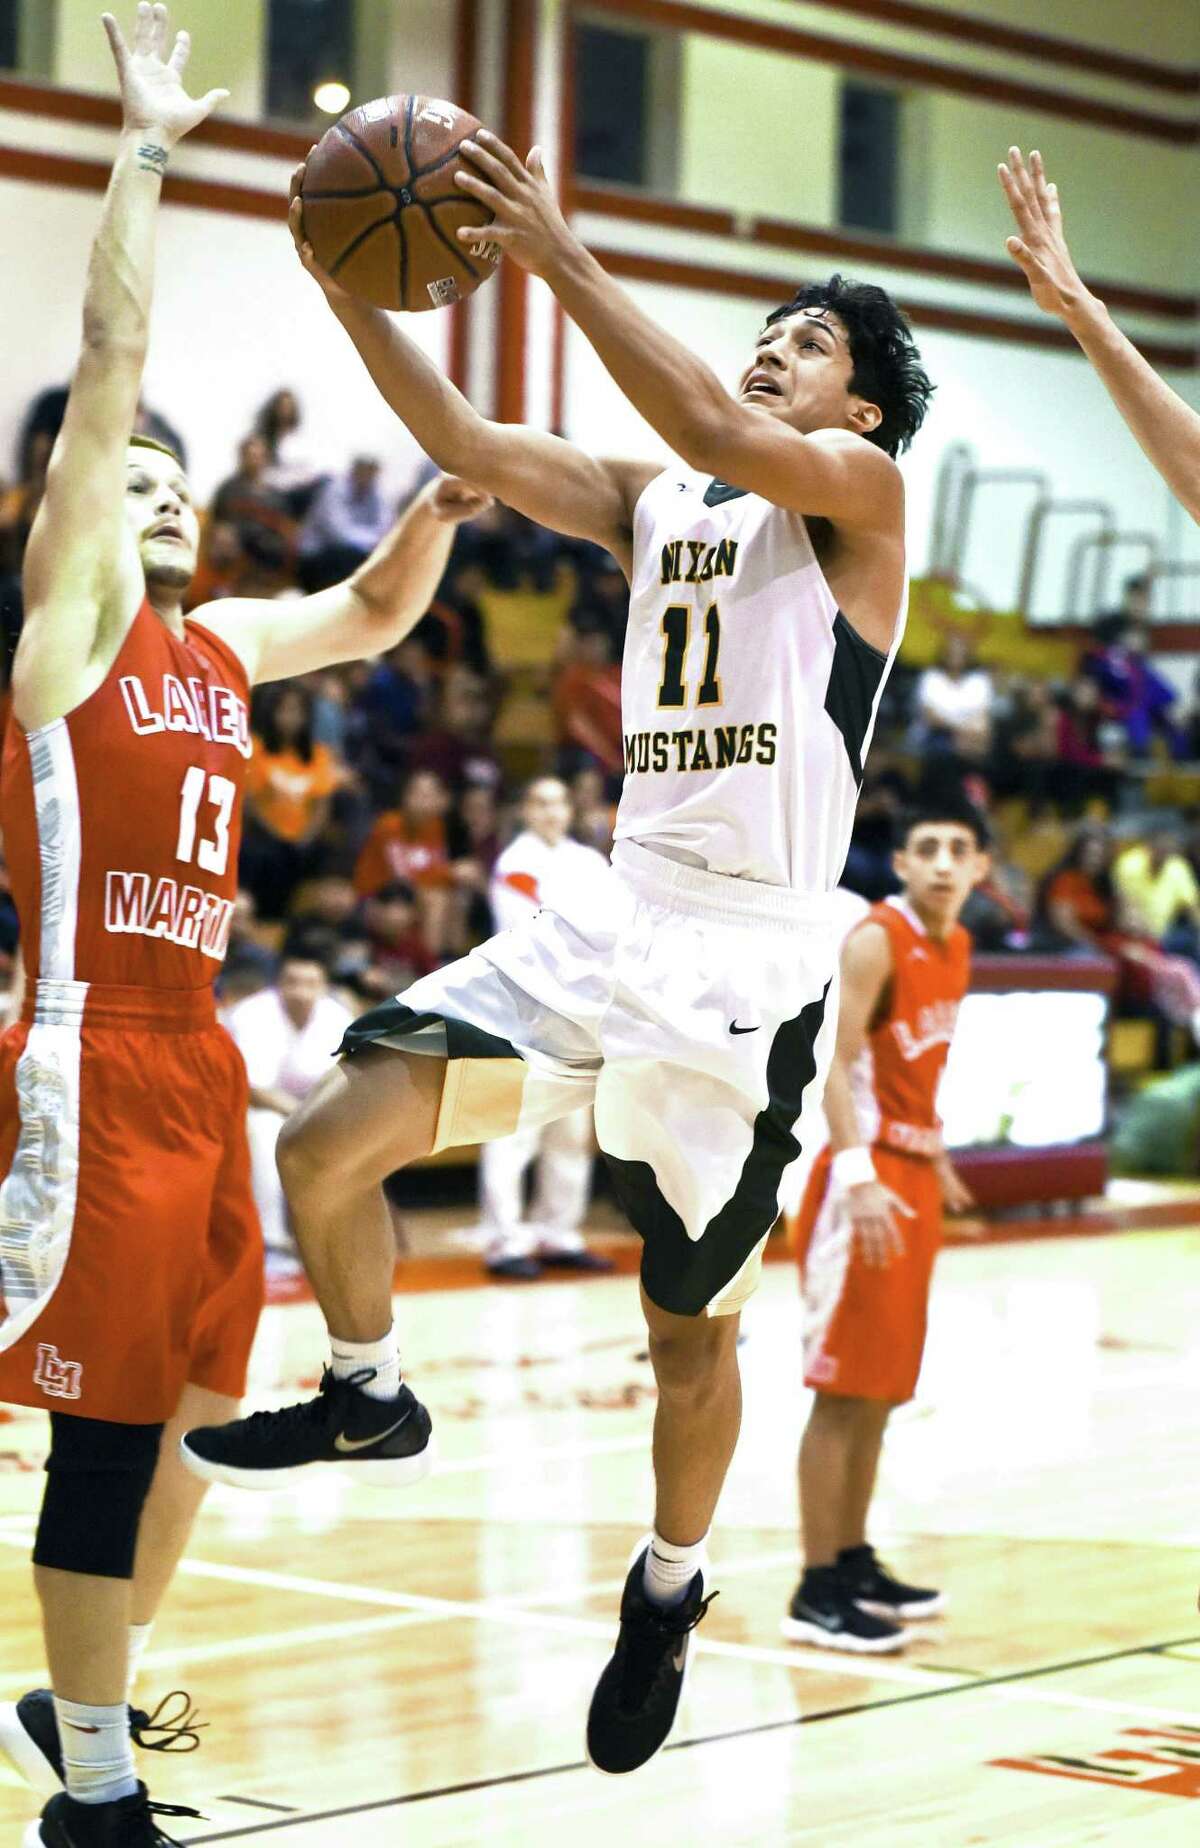 Joel Pena scored 11 points Saturday as Nixon won its first ever Border Olympics title with an 80-50 win over rival Martin.